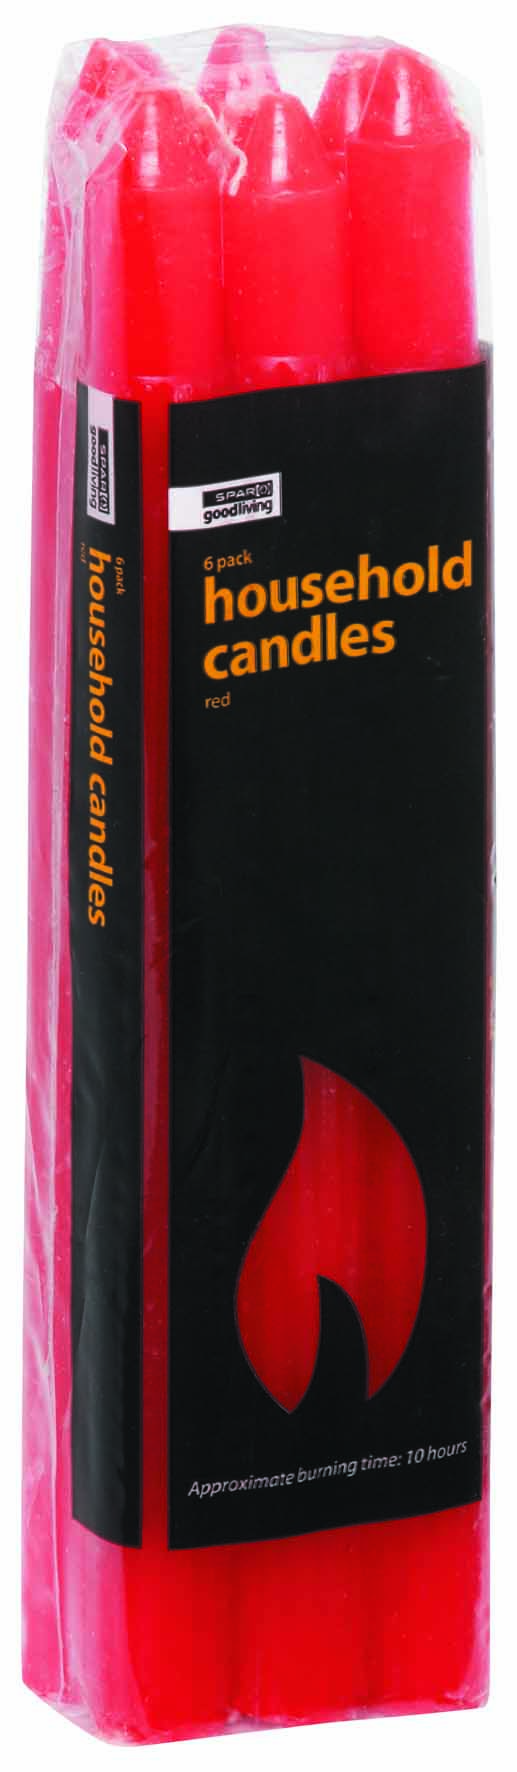 household candles - red (6 piece)